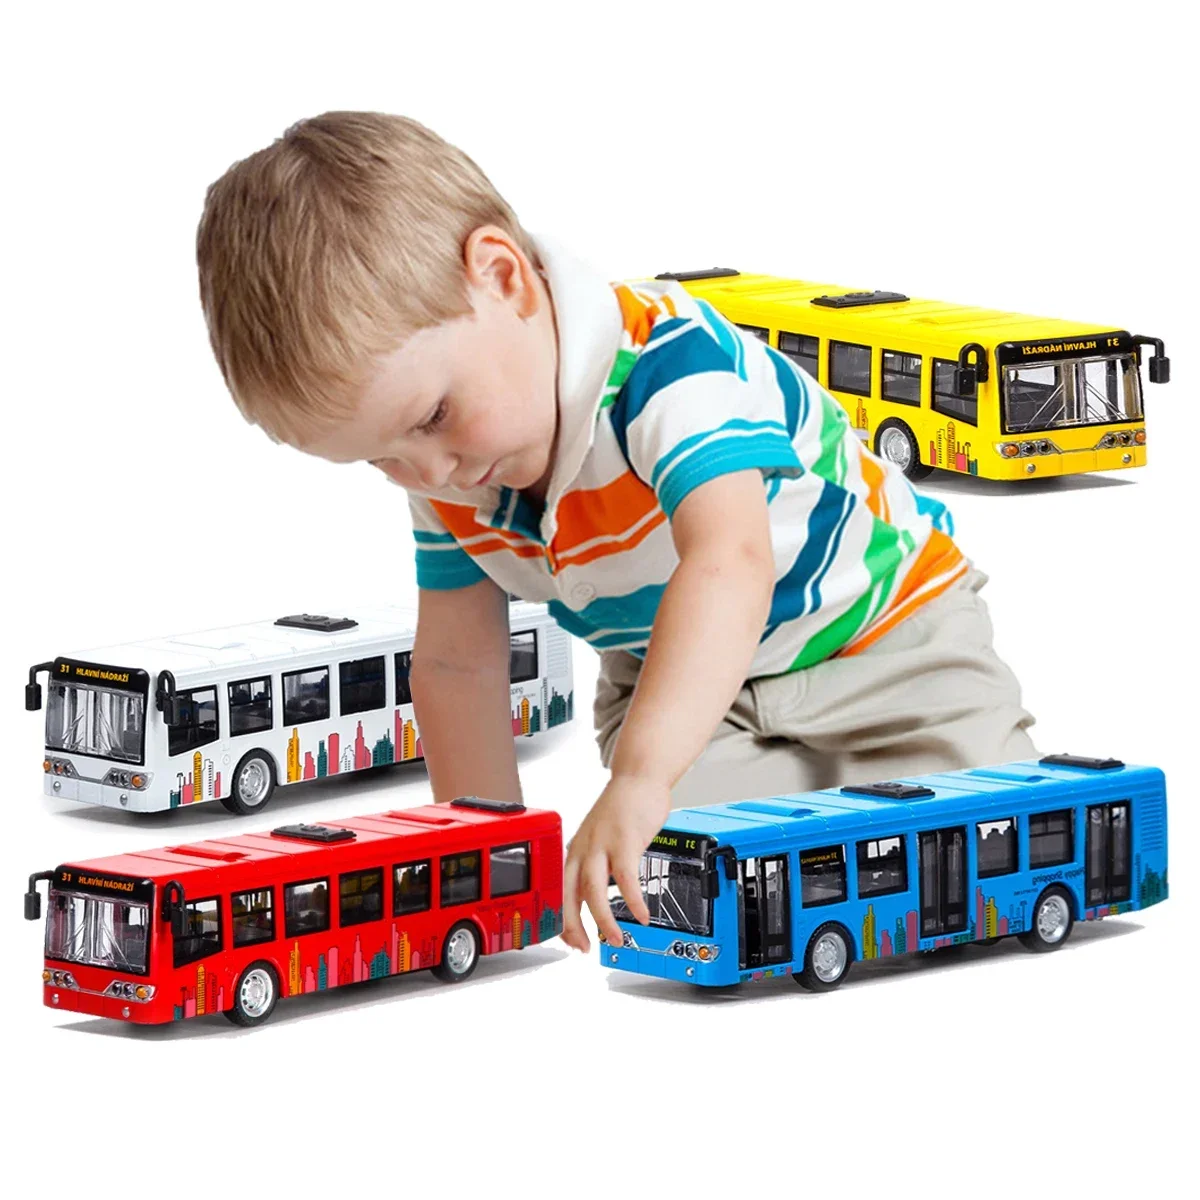 

Vehicles Toys 1:70 Alloy City Bus Model Vehicles City Express Bus Double Buses Diecast Funny Pull Back Car Children Kids Gifts